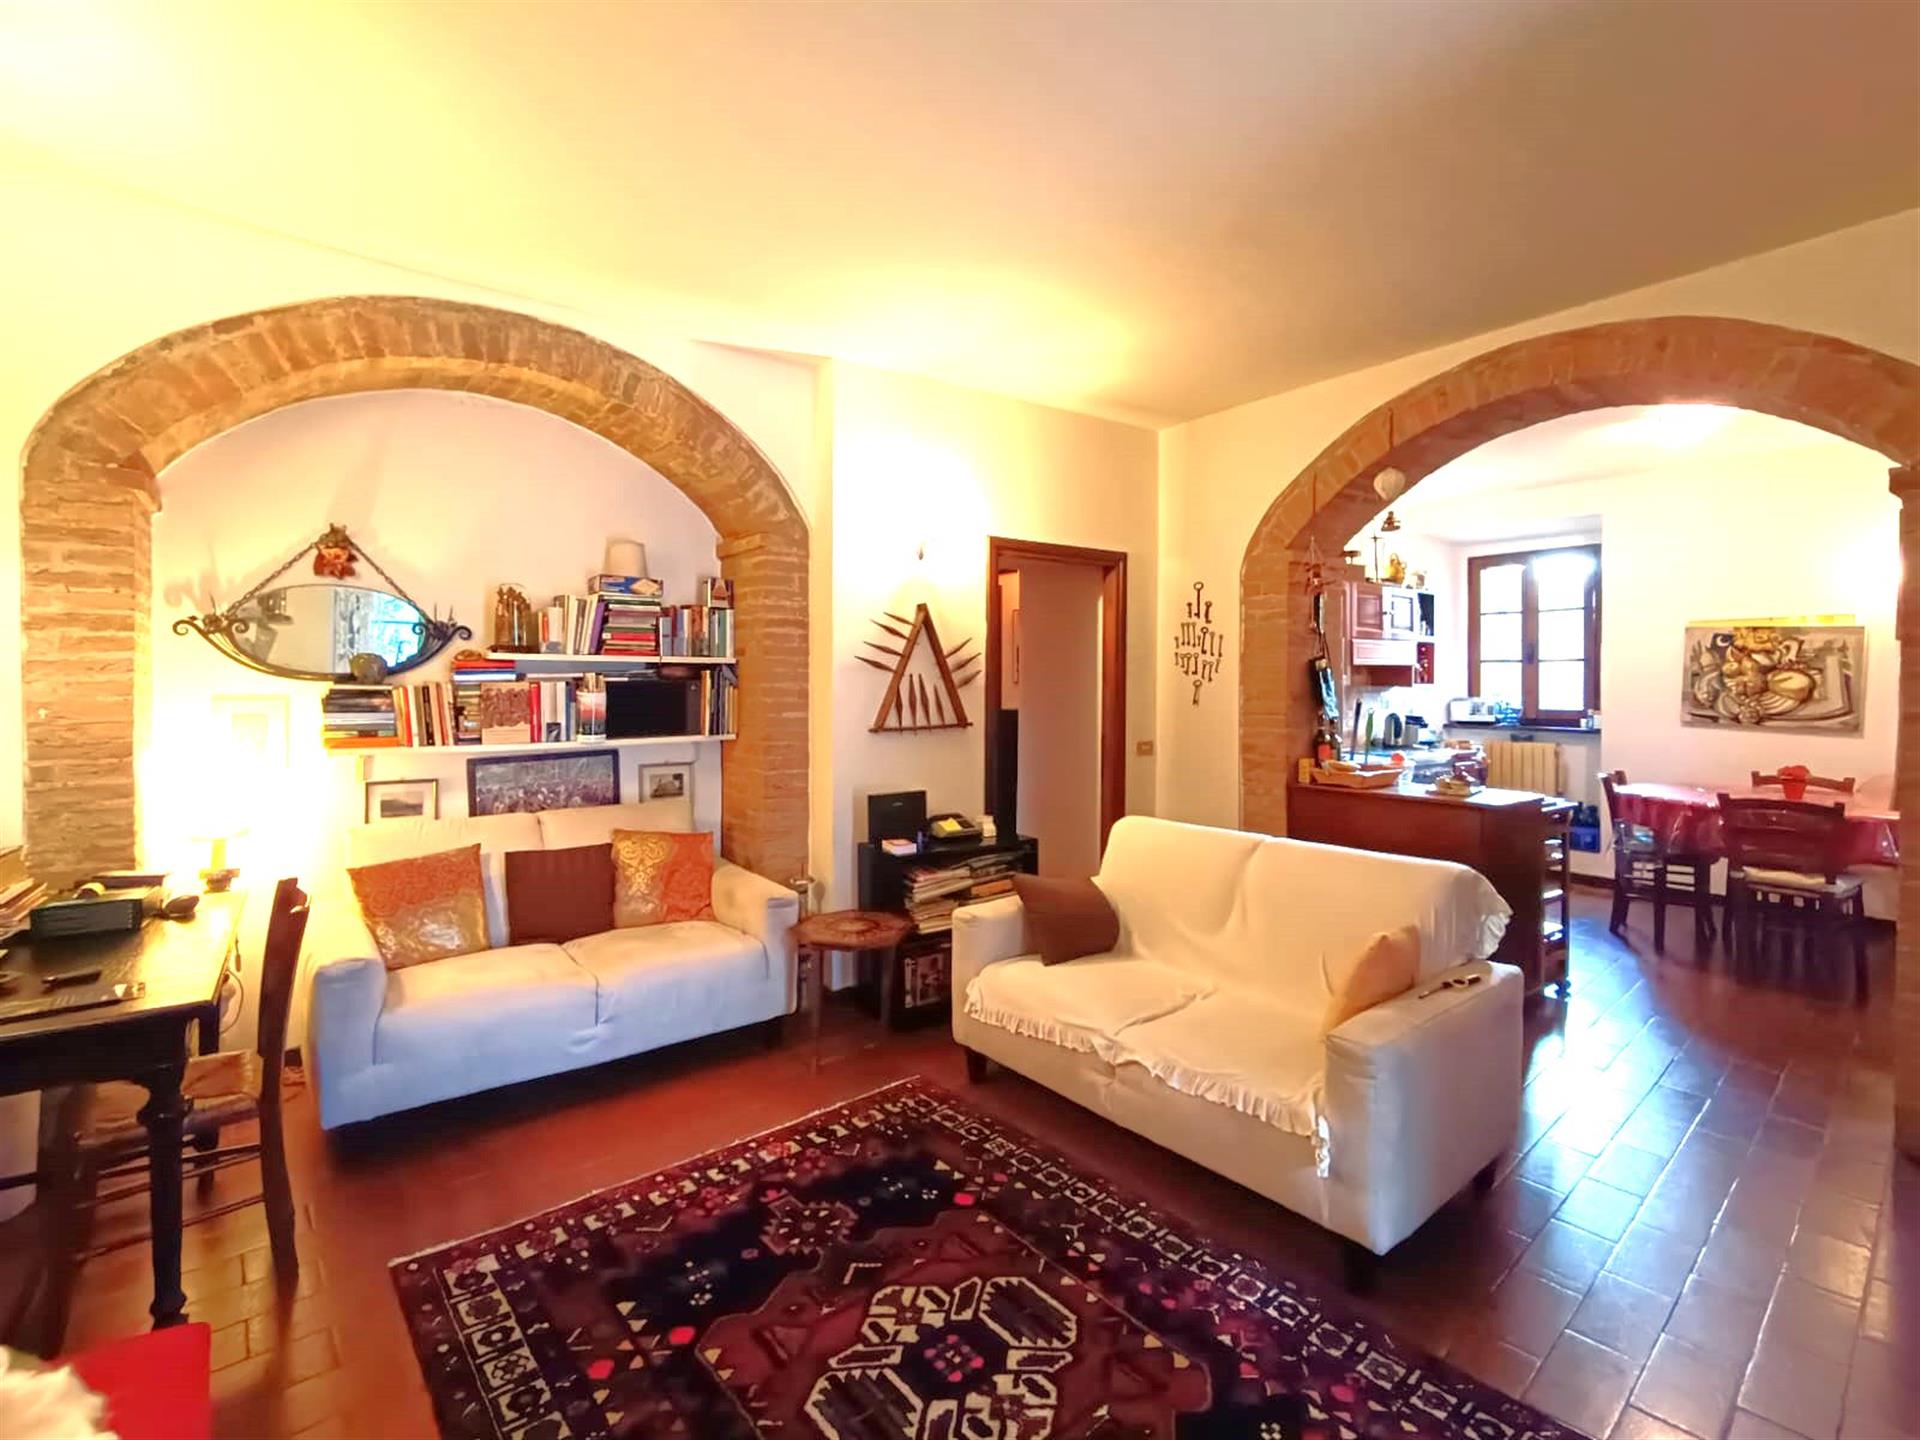 Apartment located in a historical context of a charming medieval village in the beautiful Valley